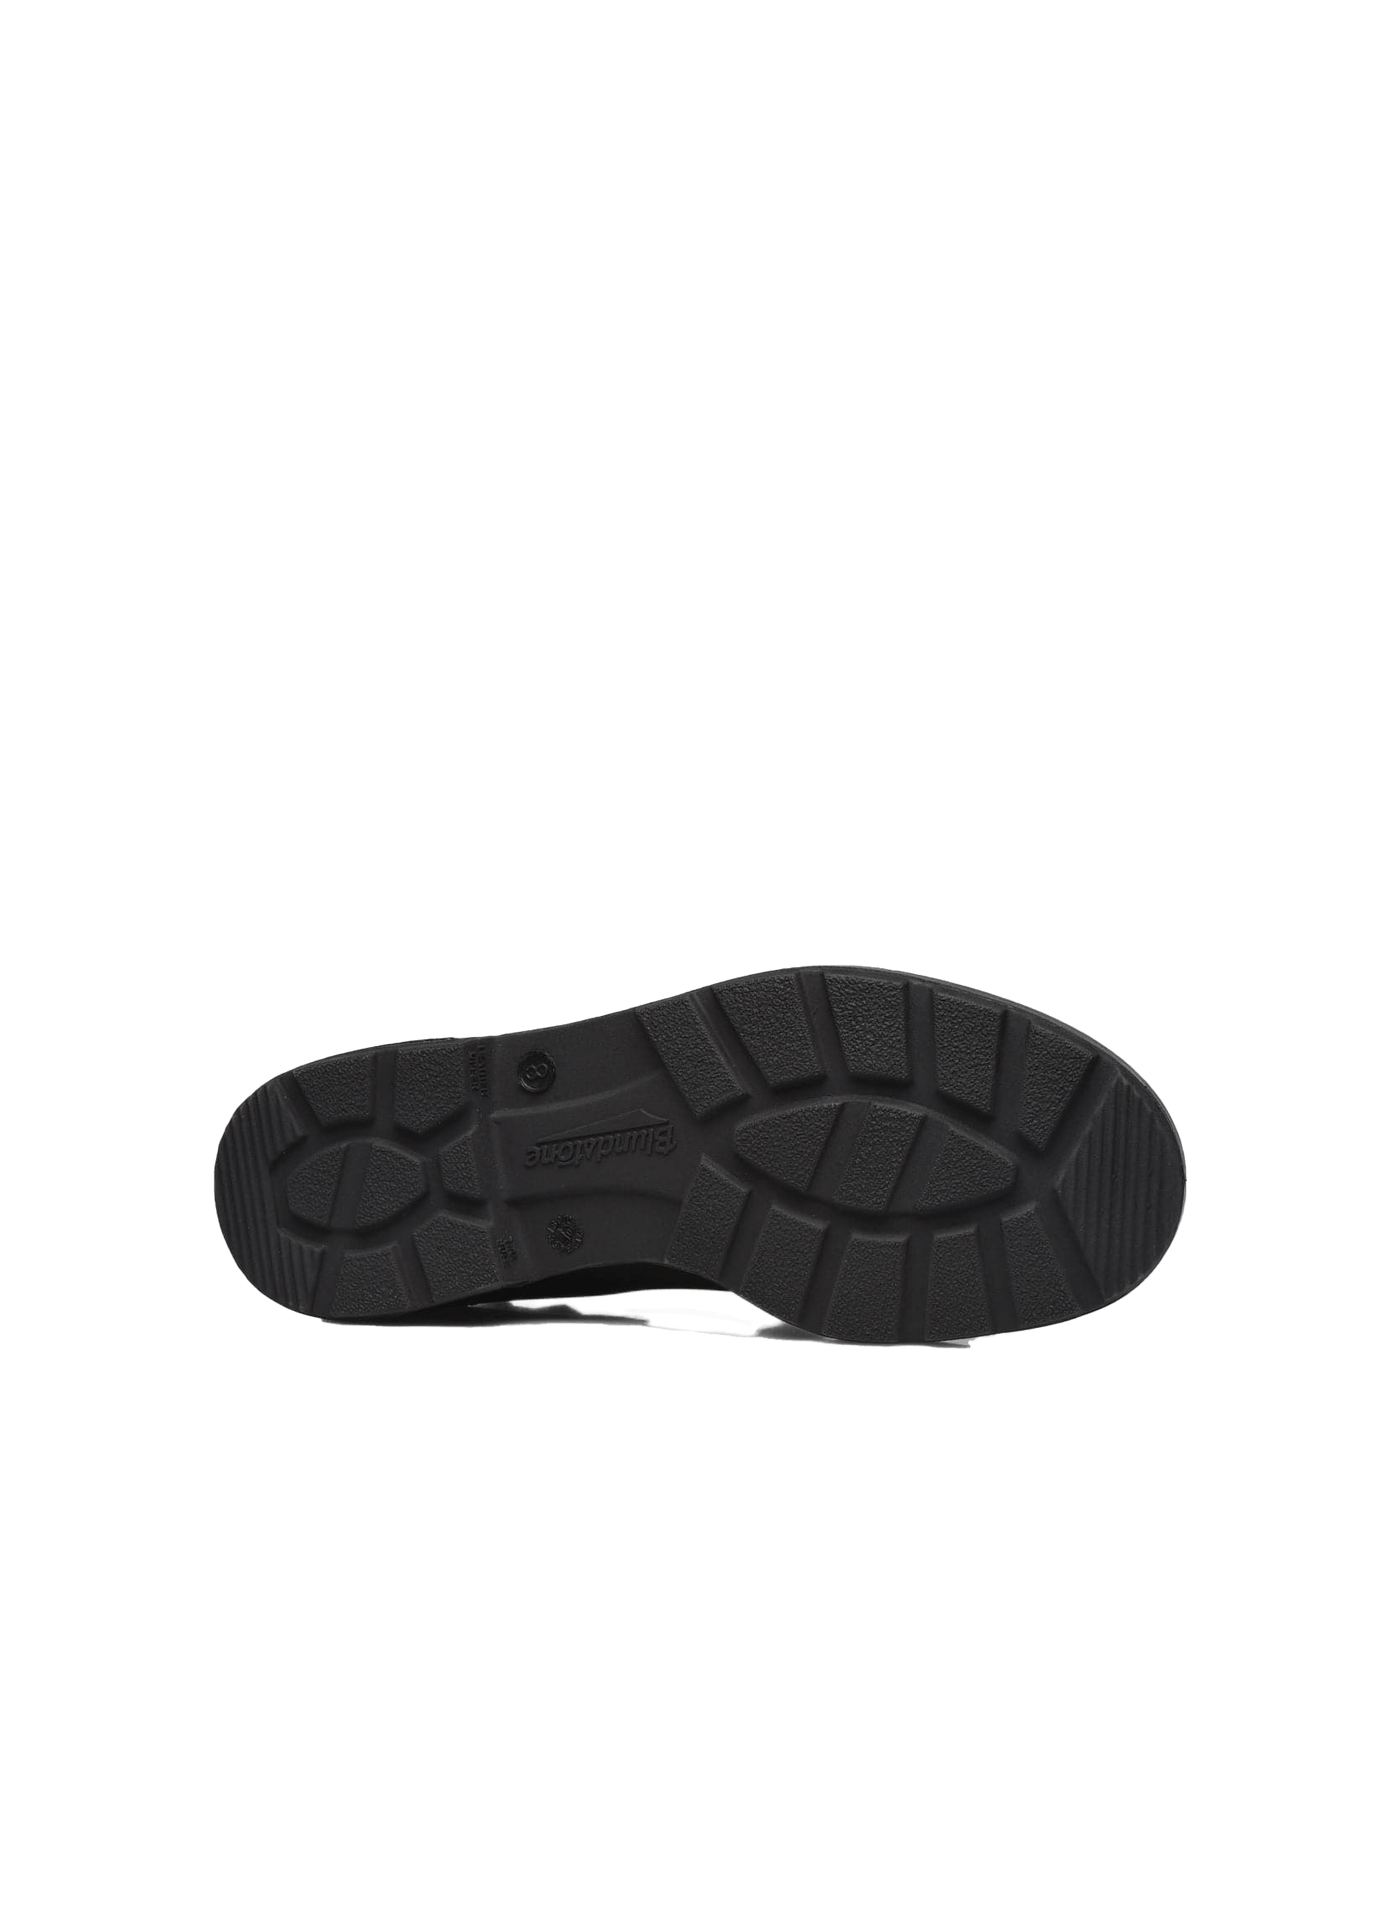 Blundstone Chaussure 510 - Elastic Sided